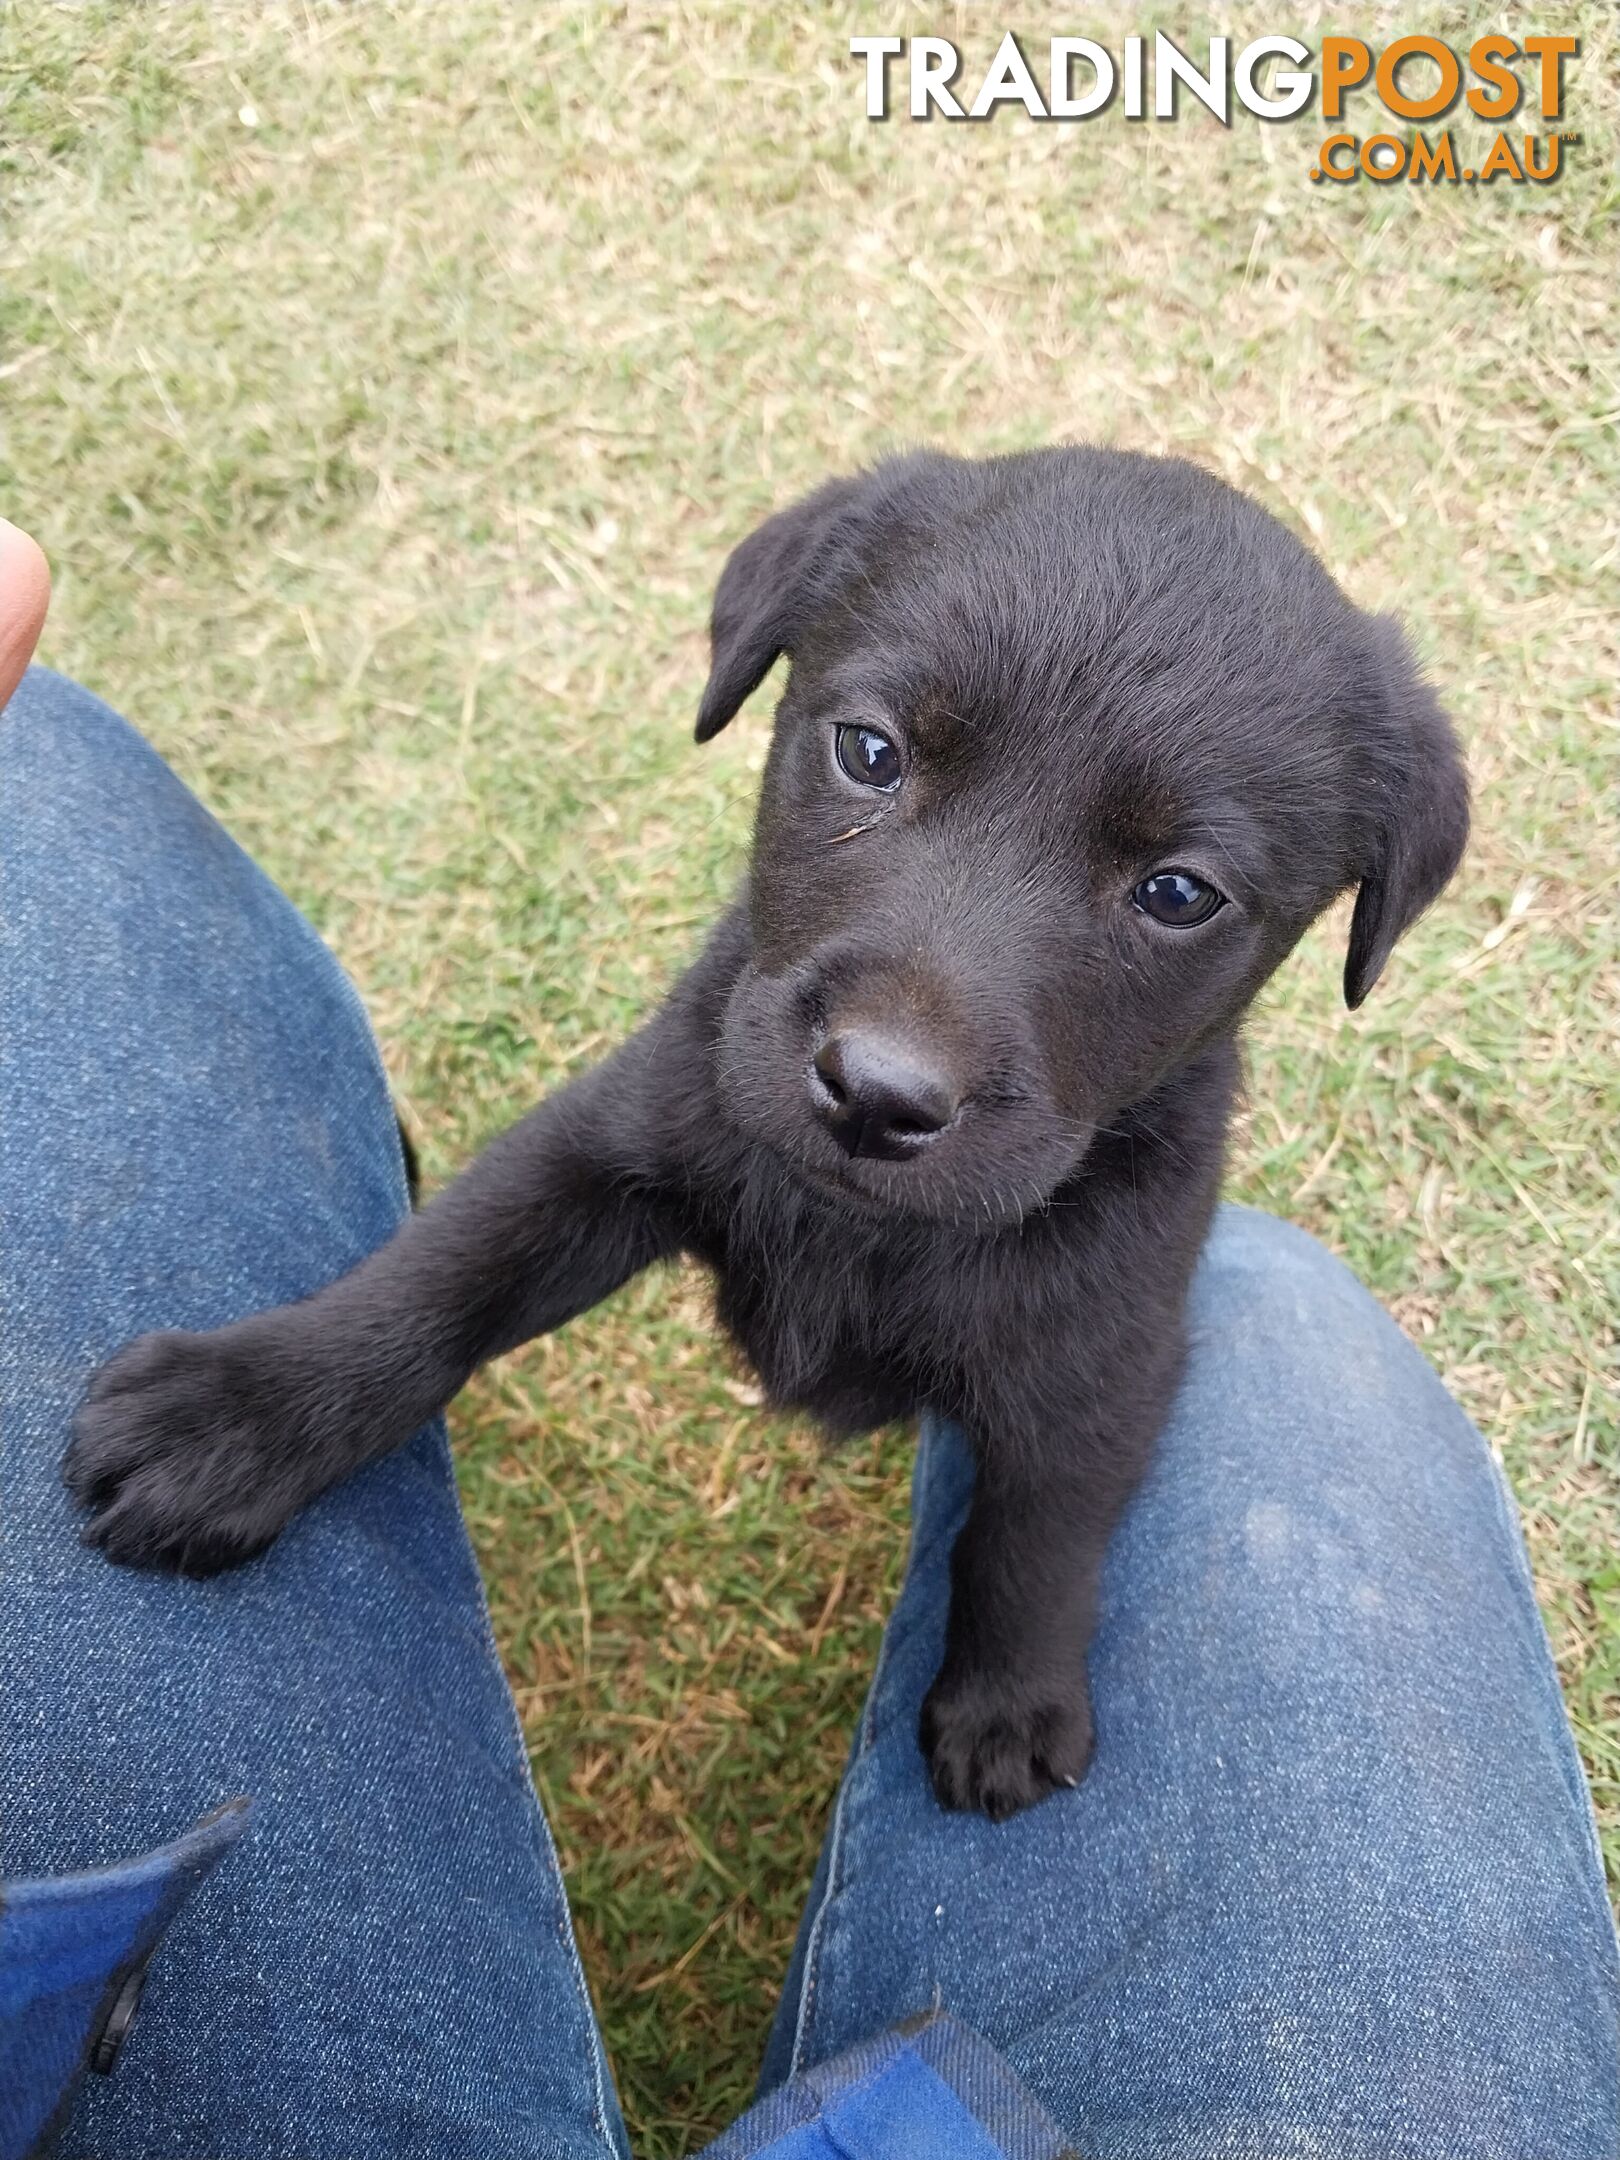 PURE Labrador pups - only 4 left!